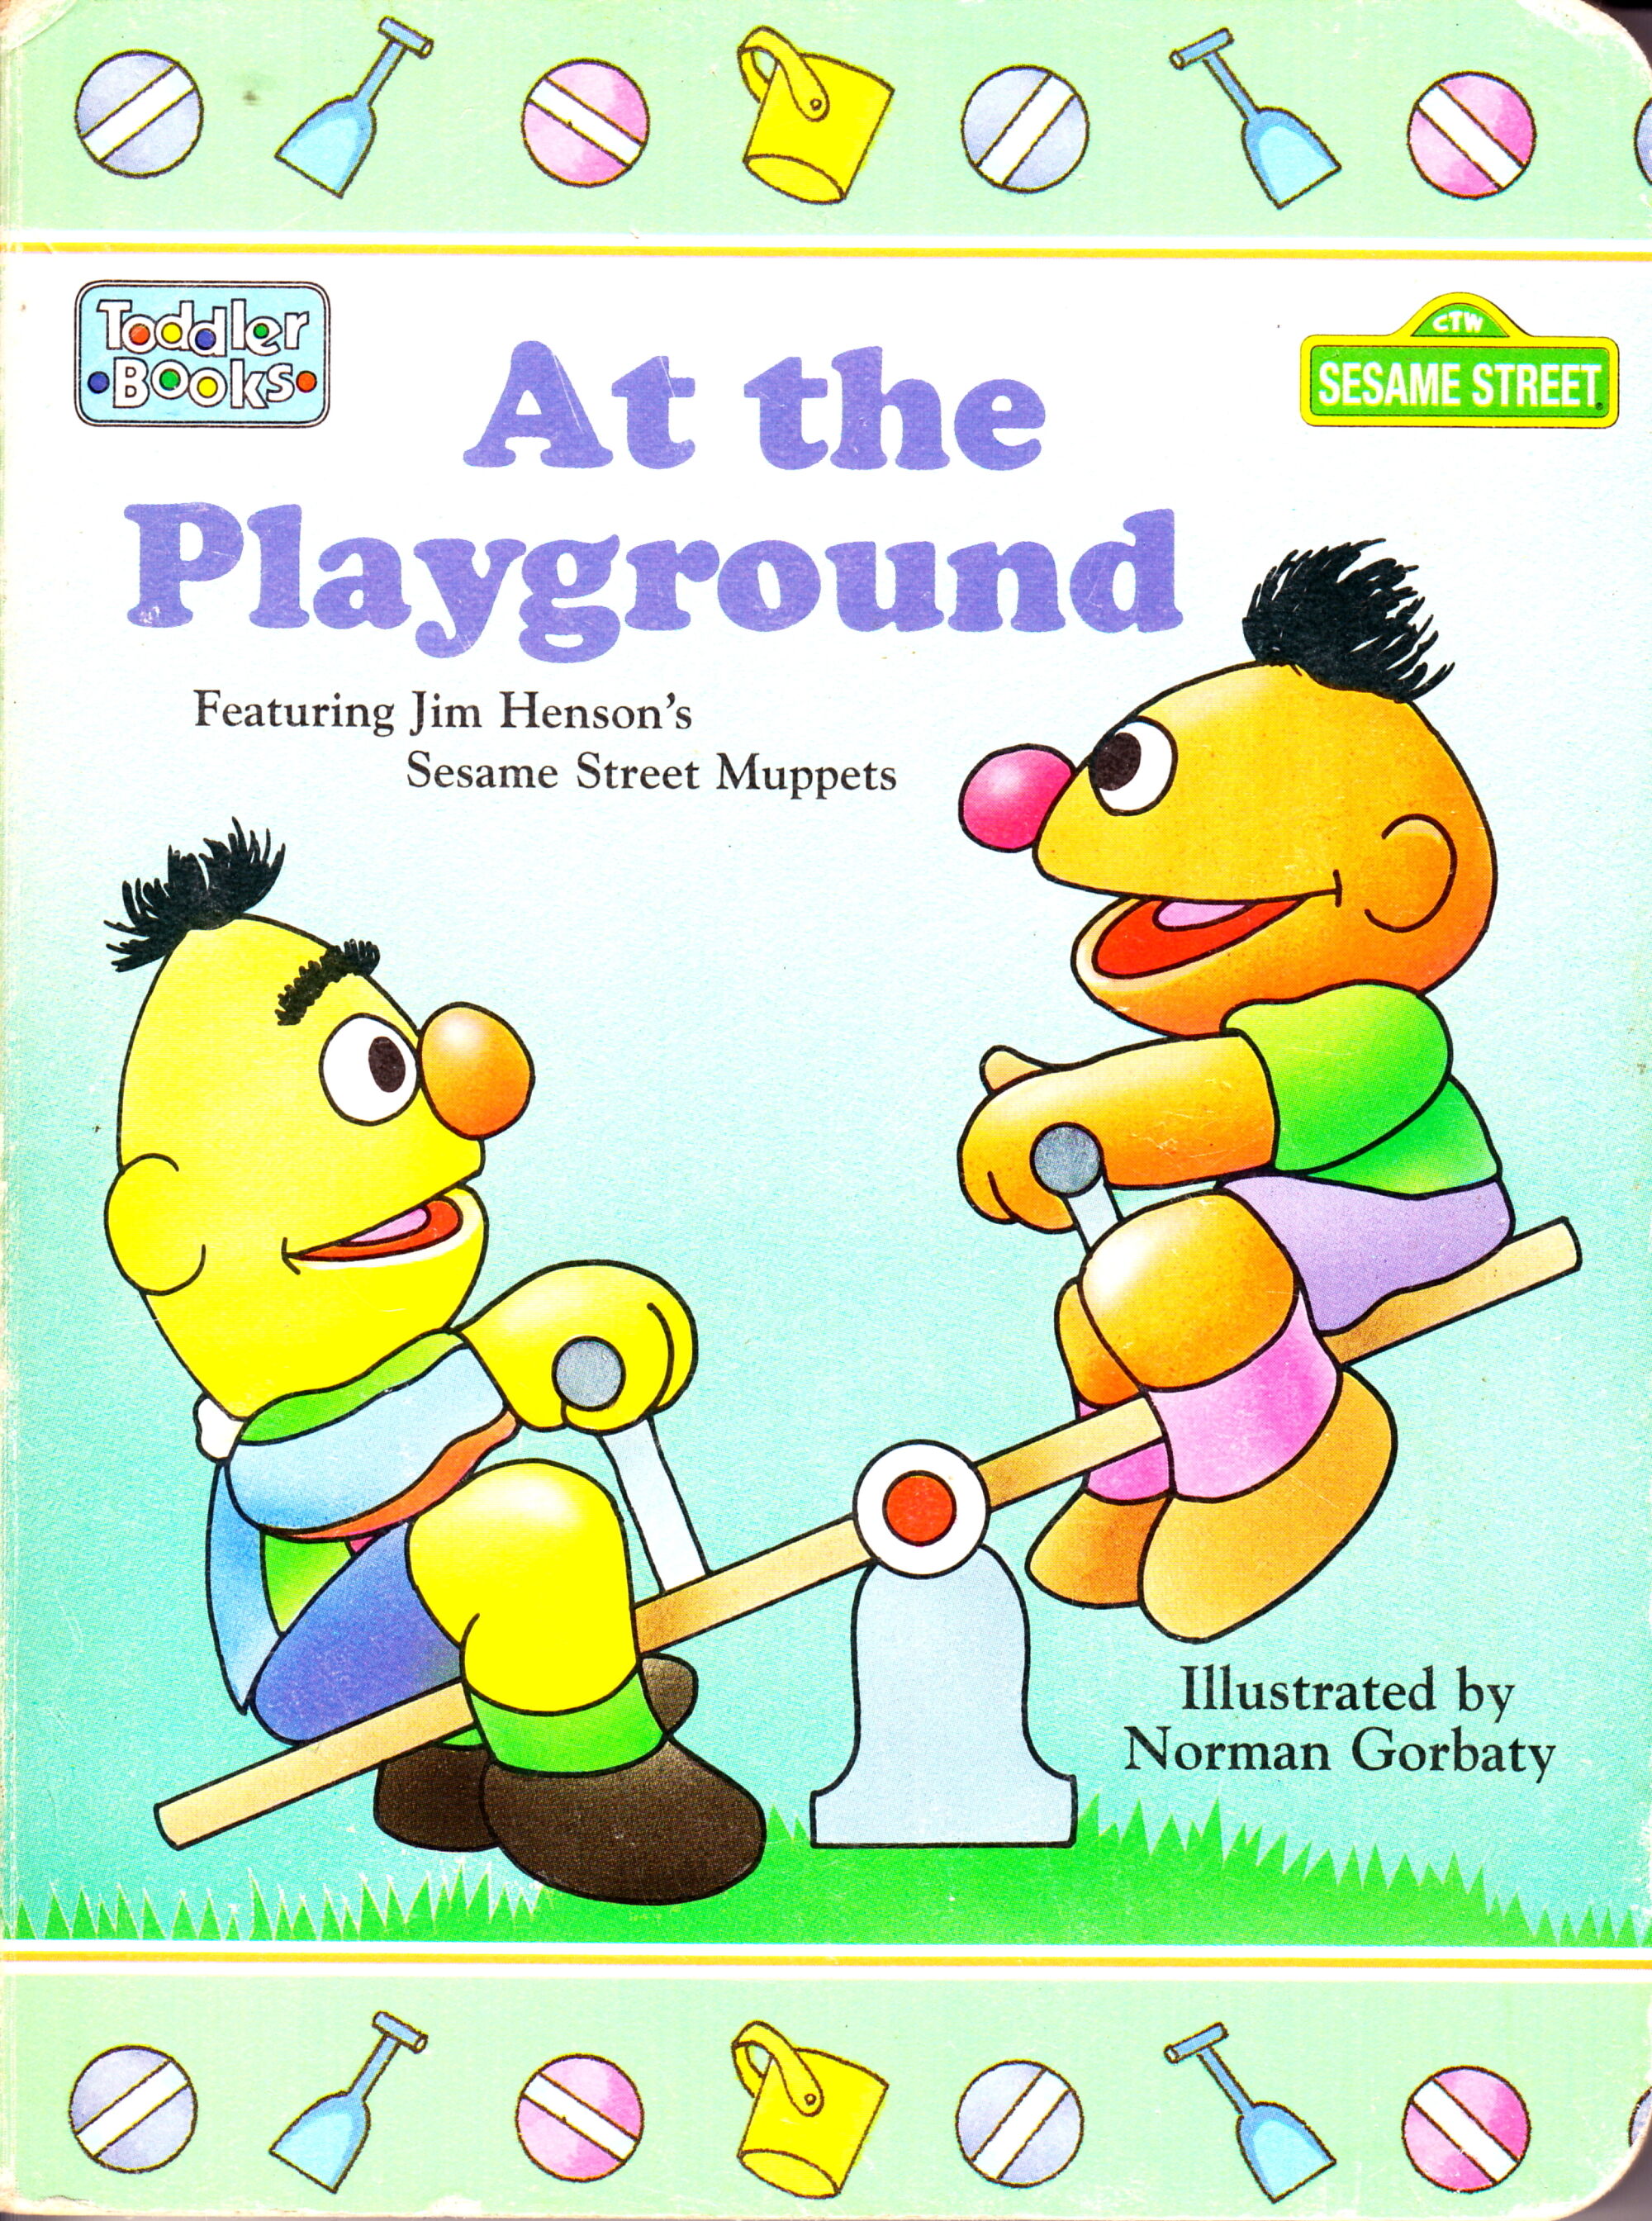 the-playground-book-review-hasty-book-list